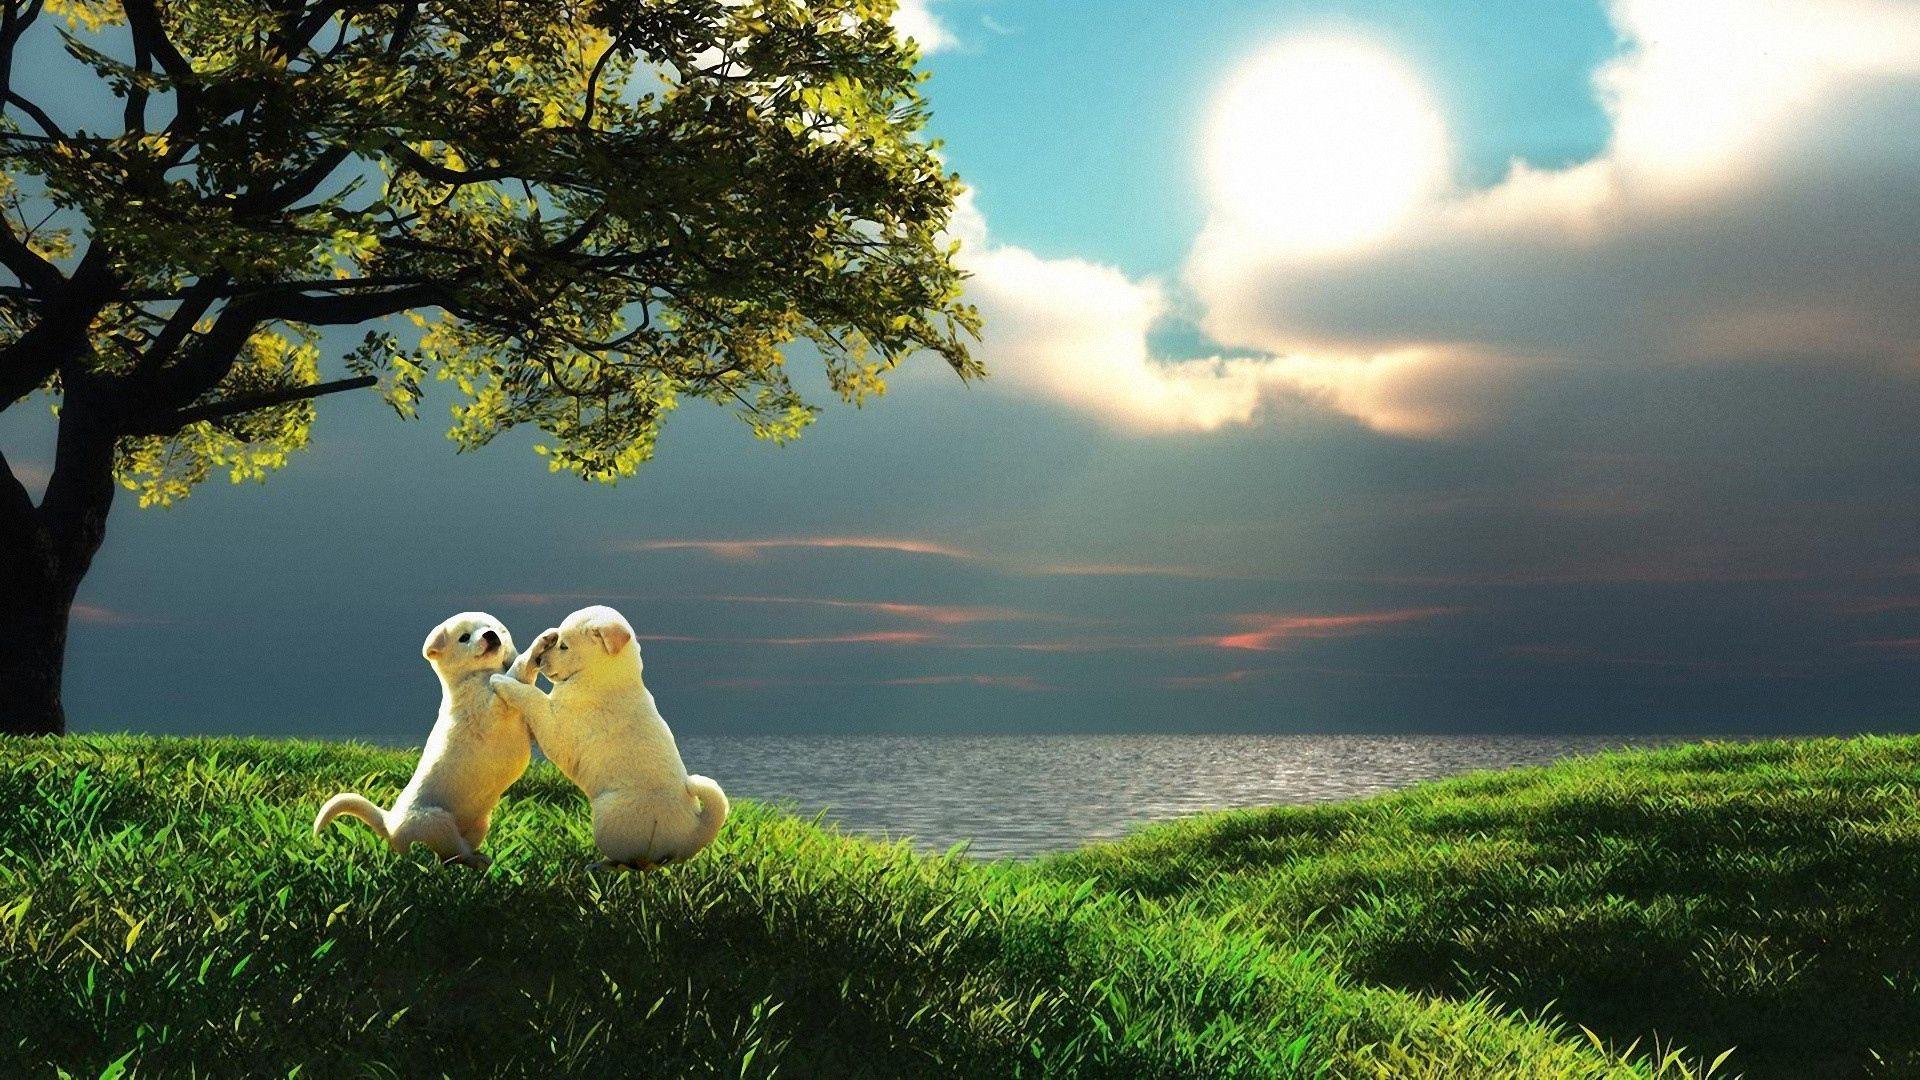 Download wallpaper 1920x1080 puppy, couple, sunset, nature, play